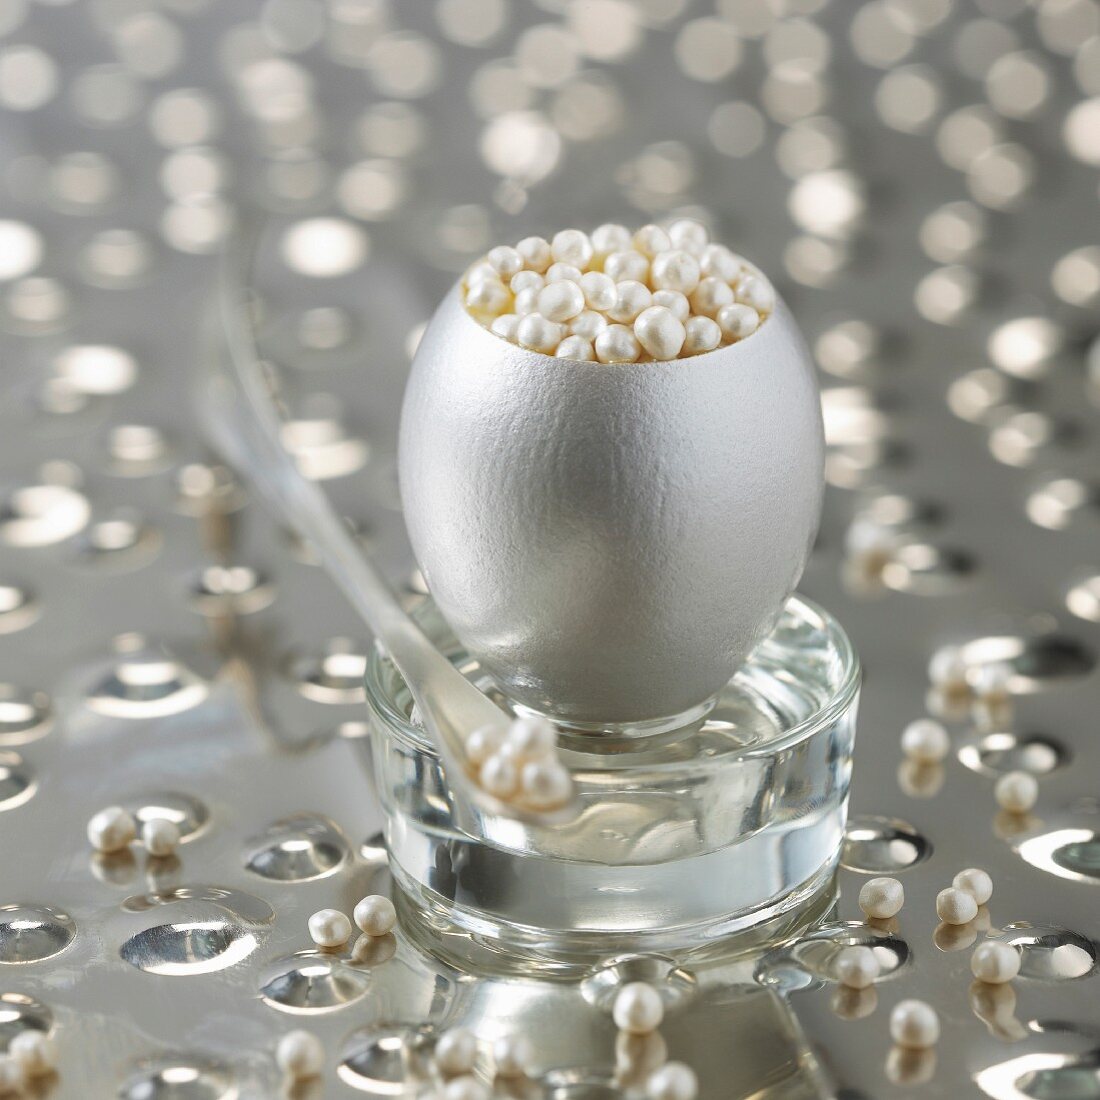 Decorative silver egg filled with shiny pearls